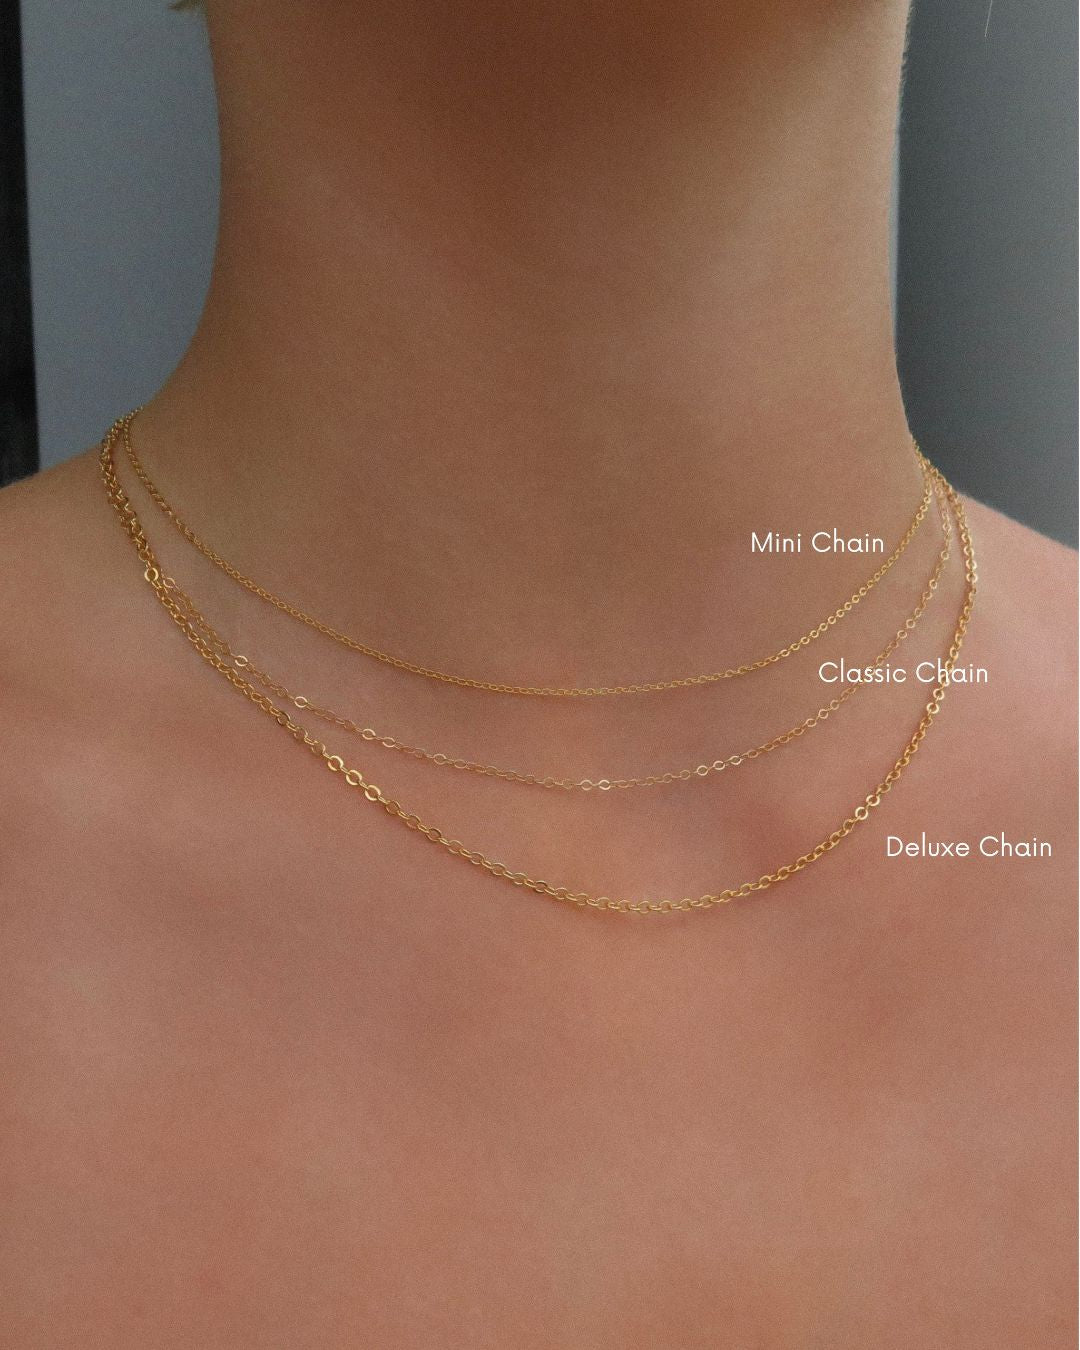 Coin Drop Necklace  - 14k Yellow Gold Fill